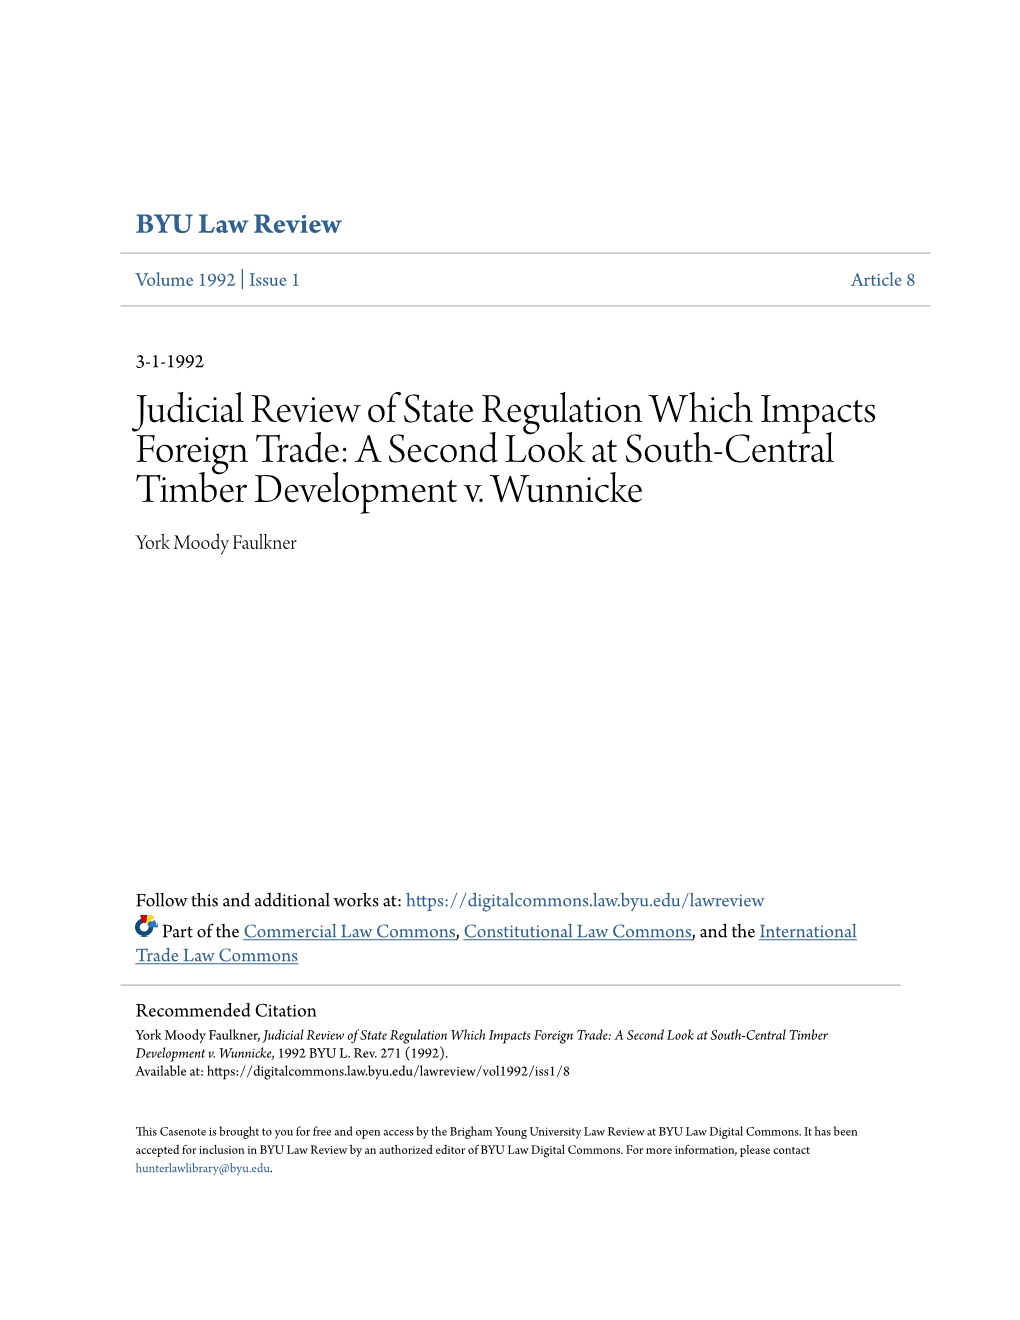 Judicial Review of State Regulation Which Impacts Foreign Trade: a Second Look at South-Central Timber Development V